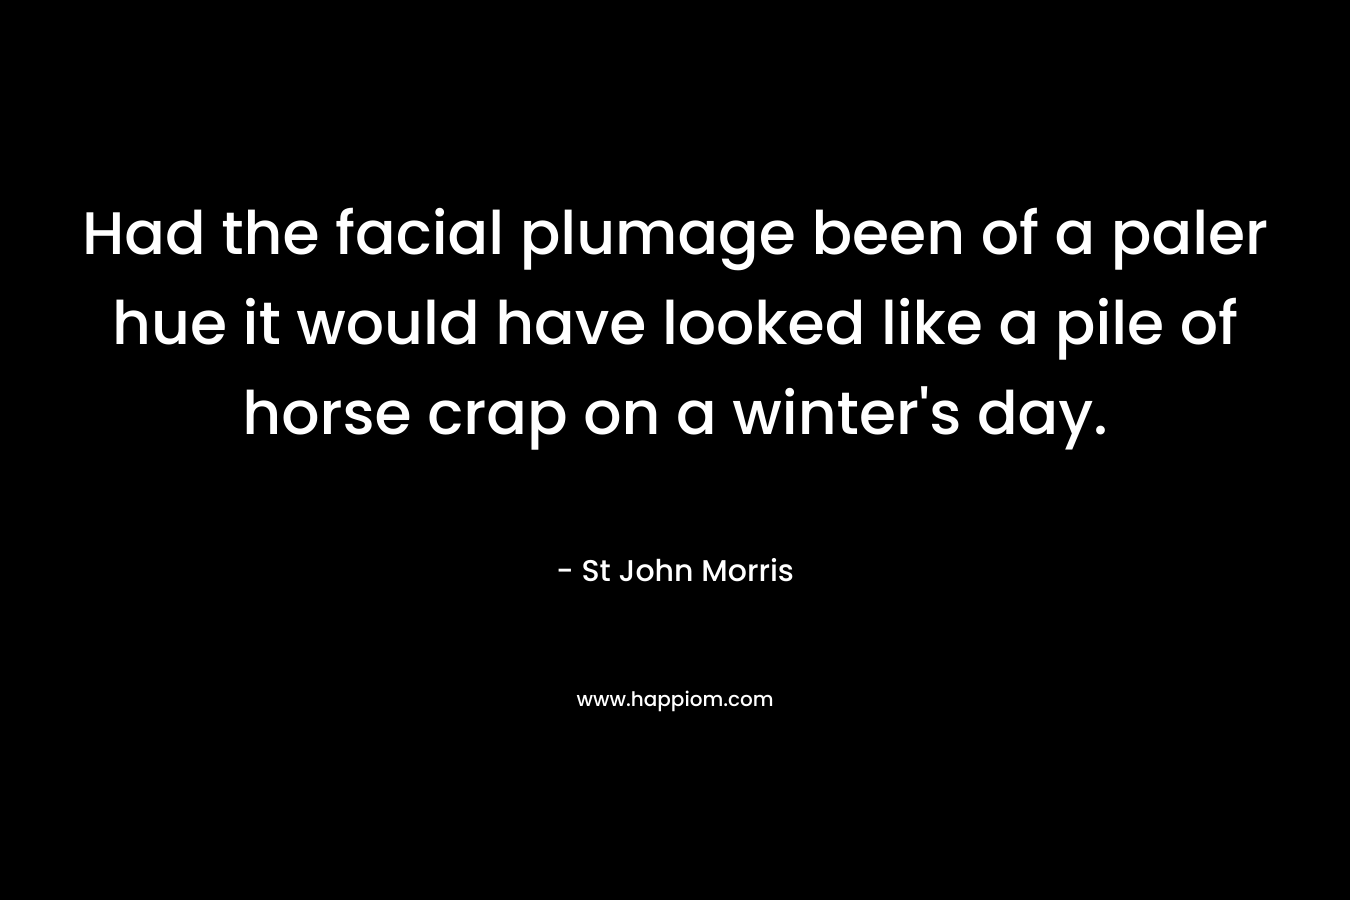 Had the facial plumage been of a paler hue it would have looked like a pile of horse crap on a winter's day.